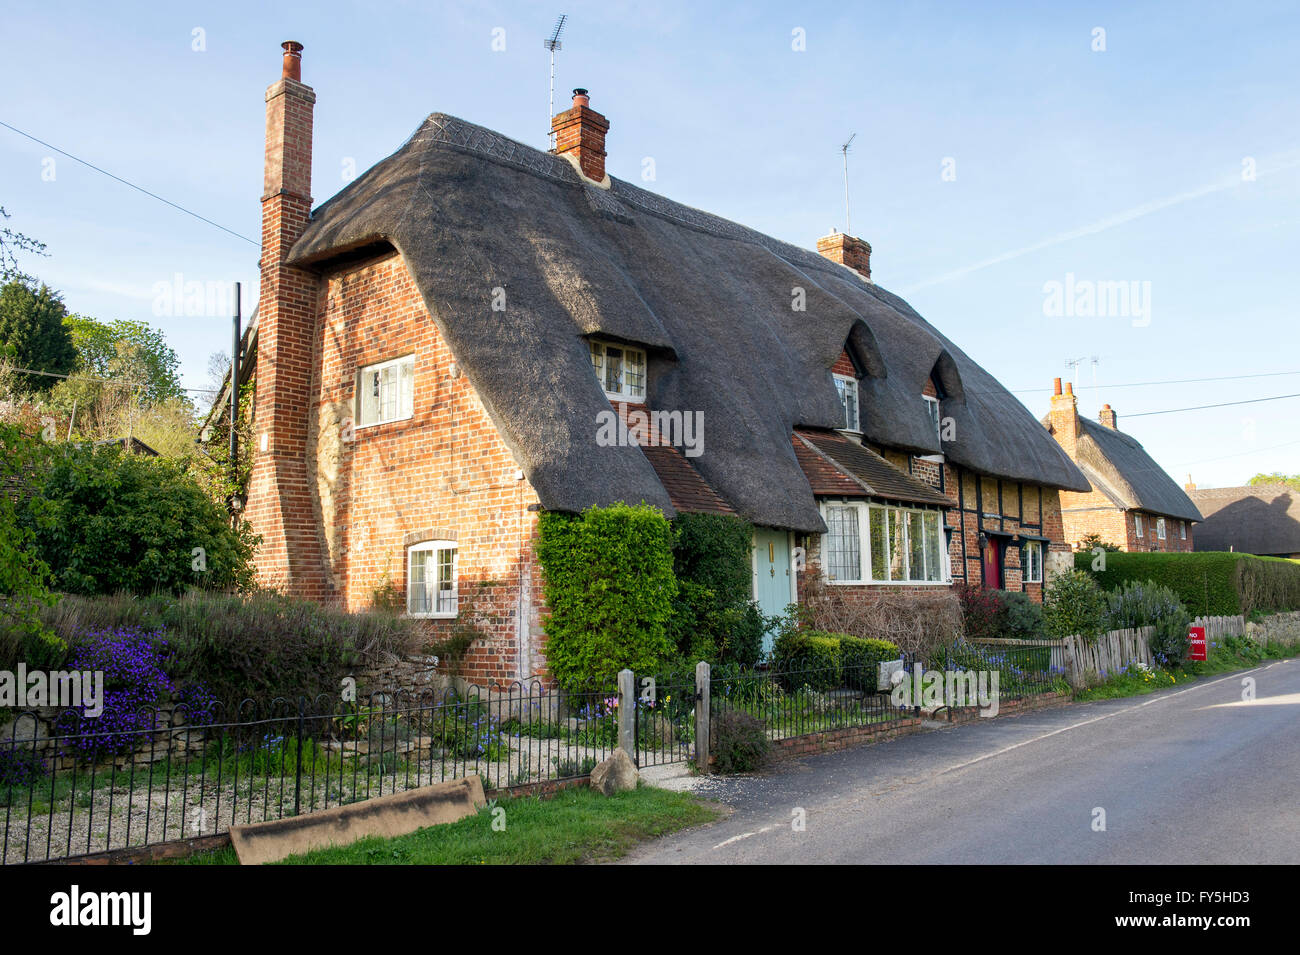 Thatched cottage in Clifton Hampden, Oxfordshire, England Stock Photo